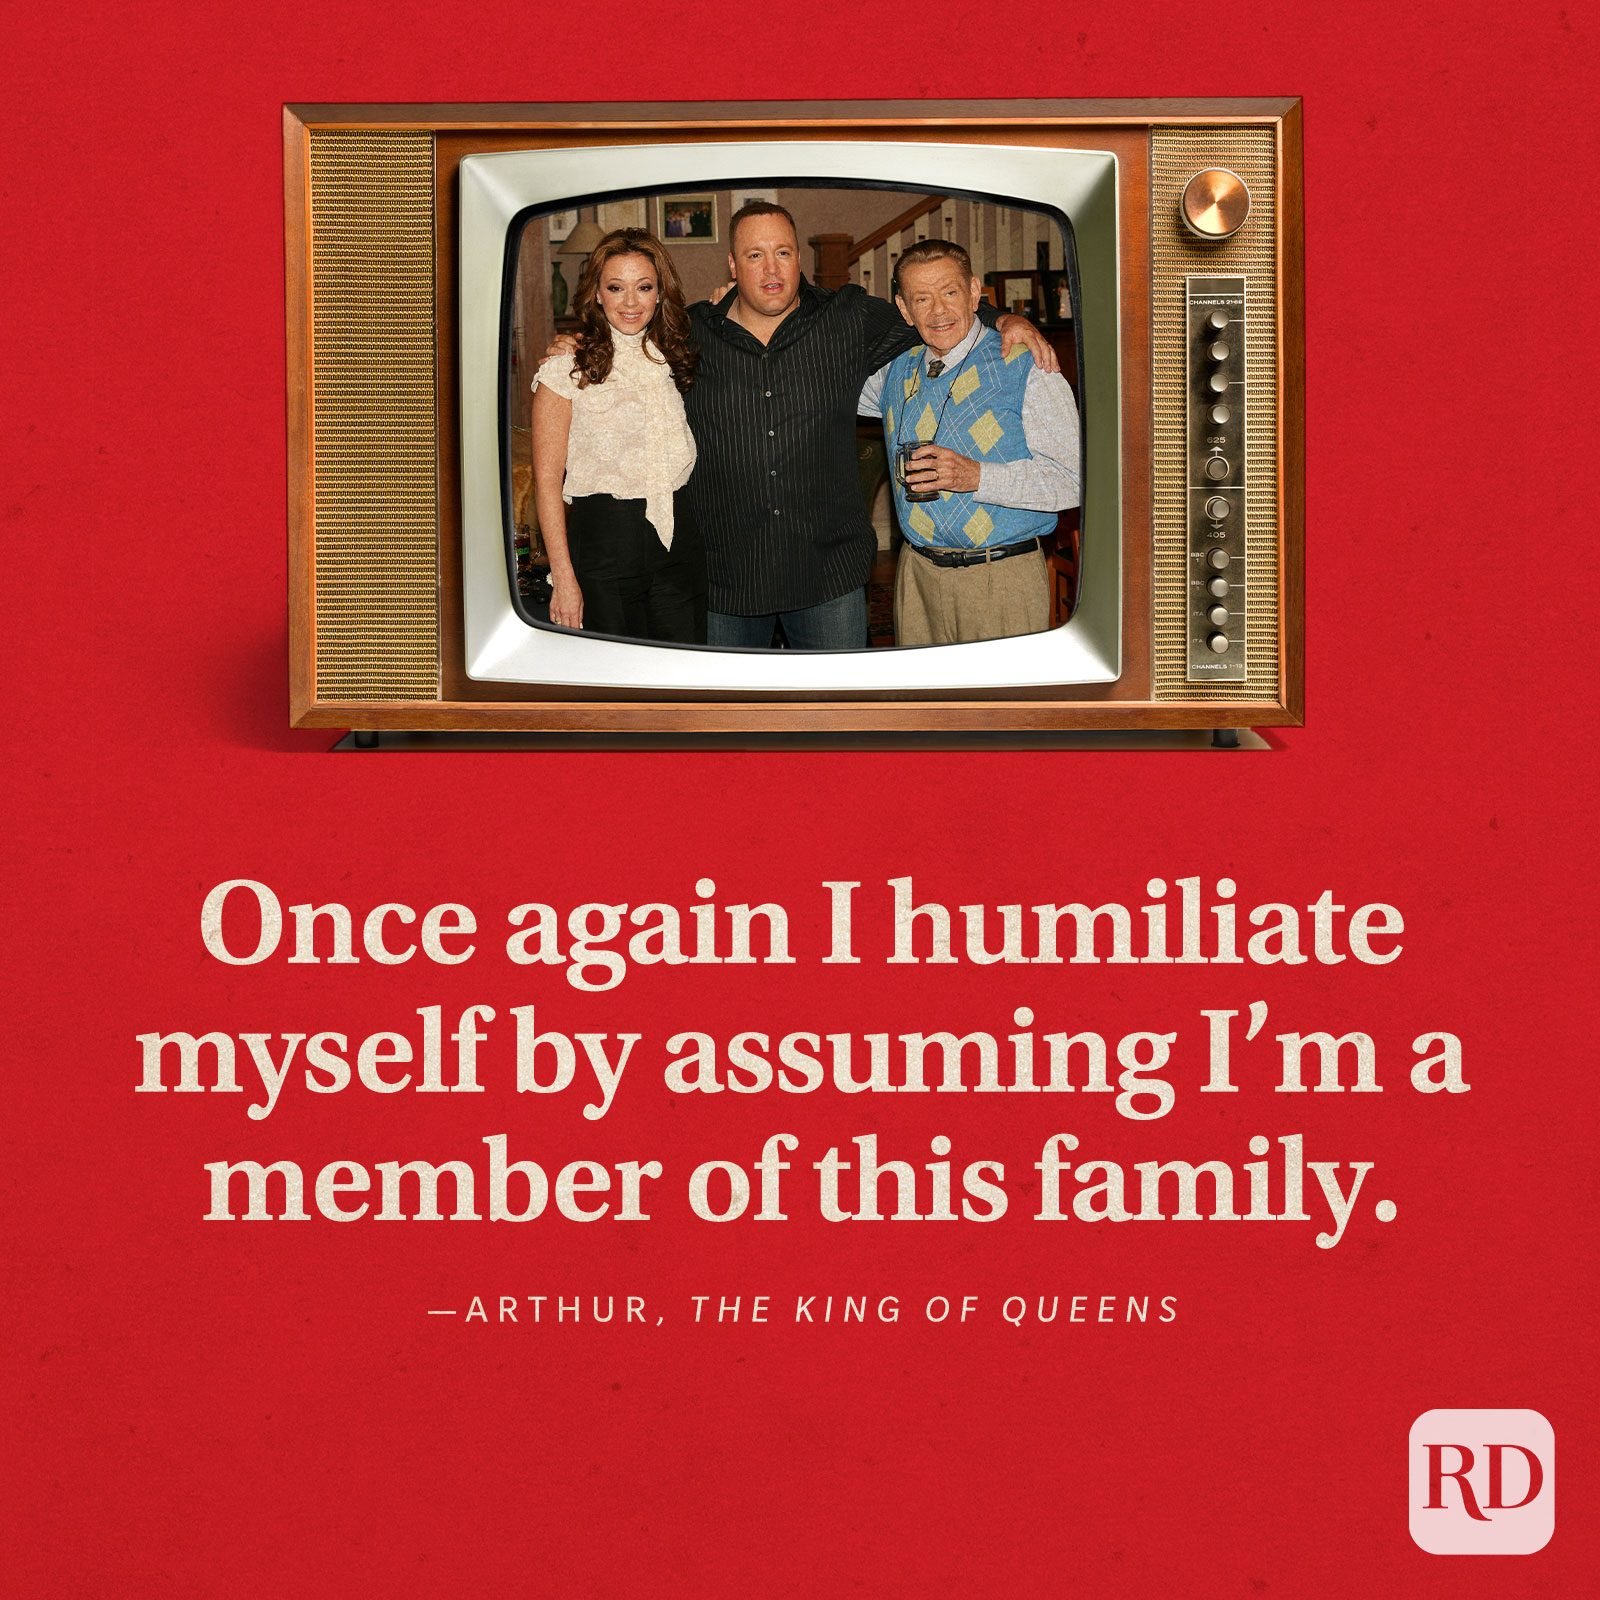  “Once again I humiliate myself by assuming I’m a member of this family.” -Arthur in The King of Queens.